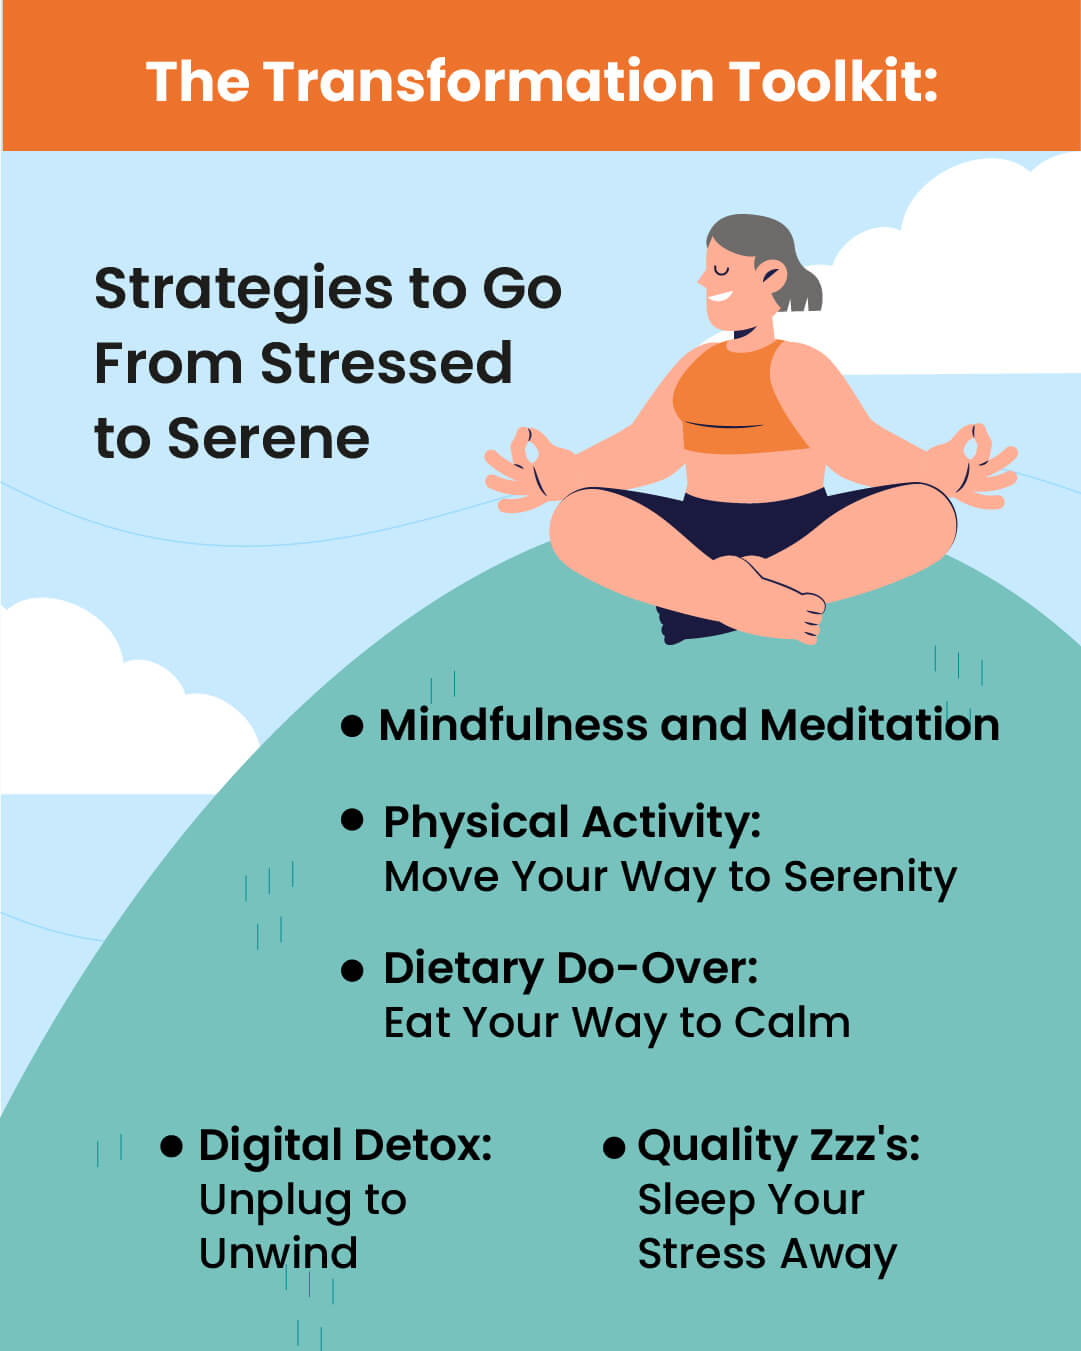 Woman meditating with text "The Transformation Toolkit: Strategies to Go From Stressed to Serene" listing mindfulness, physical activity, dietary changes, digital detox, and sleep